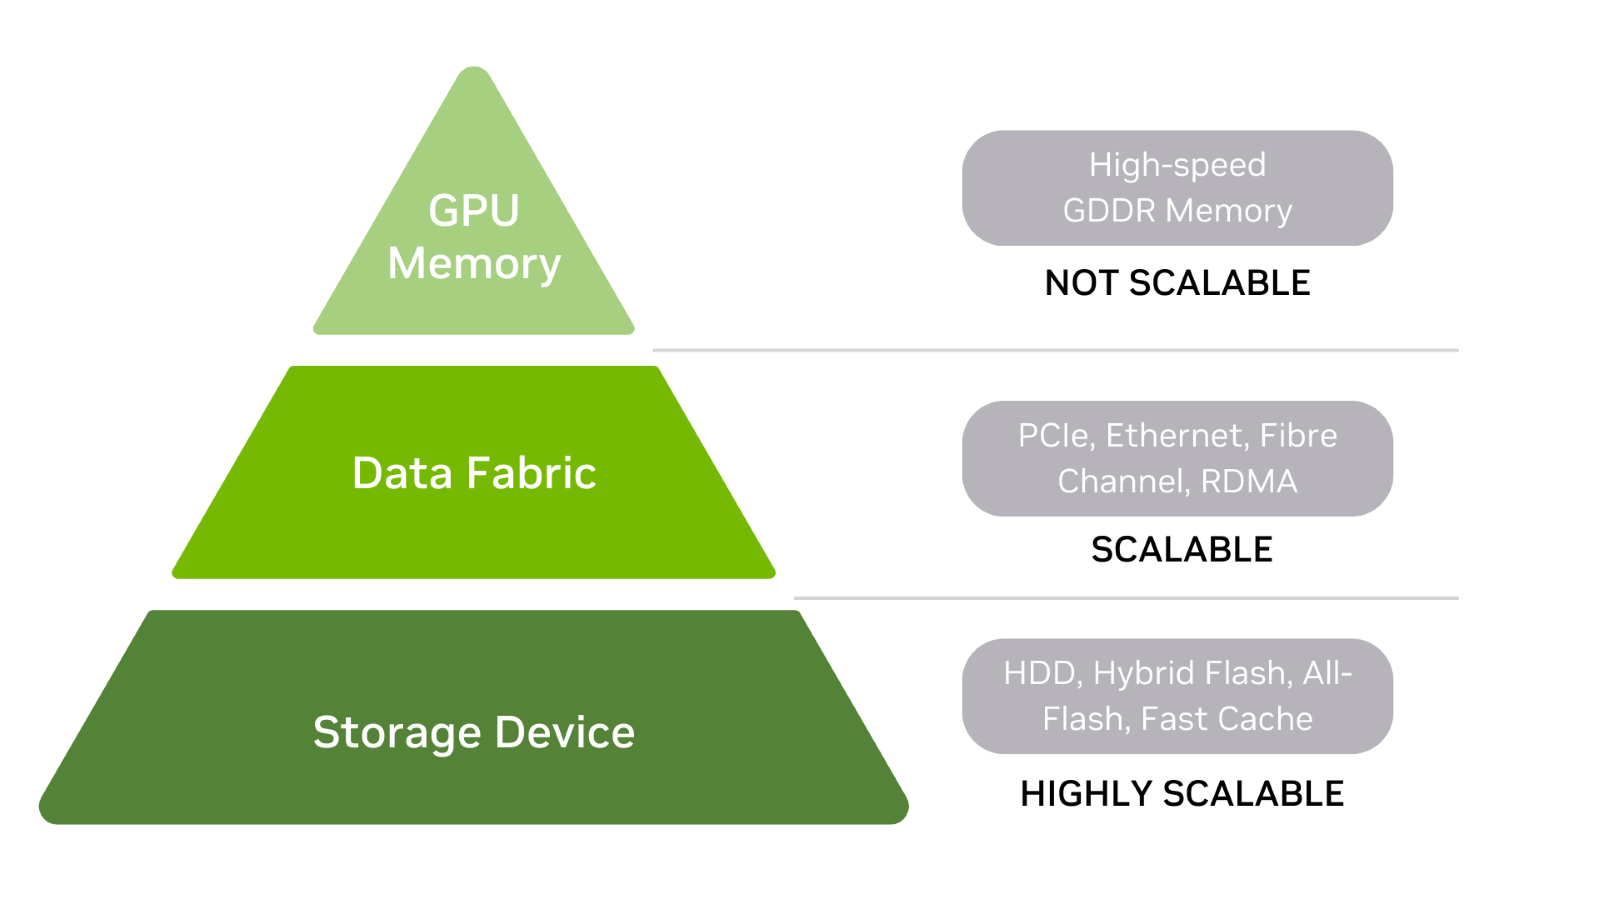 Diagram shows a data storage hierarchy pyramid with highly scalable storage devices at the bottom of the pyramid, scalable data fabric as the middle layer, and unscalable GPU memory at the top.